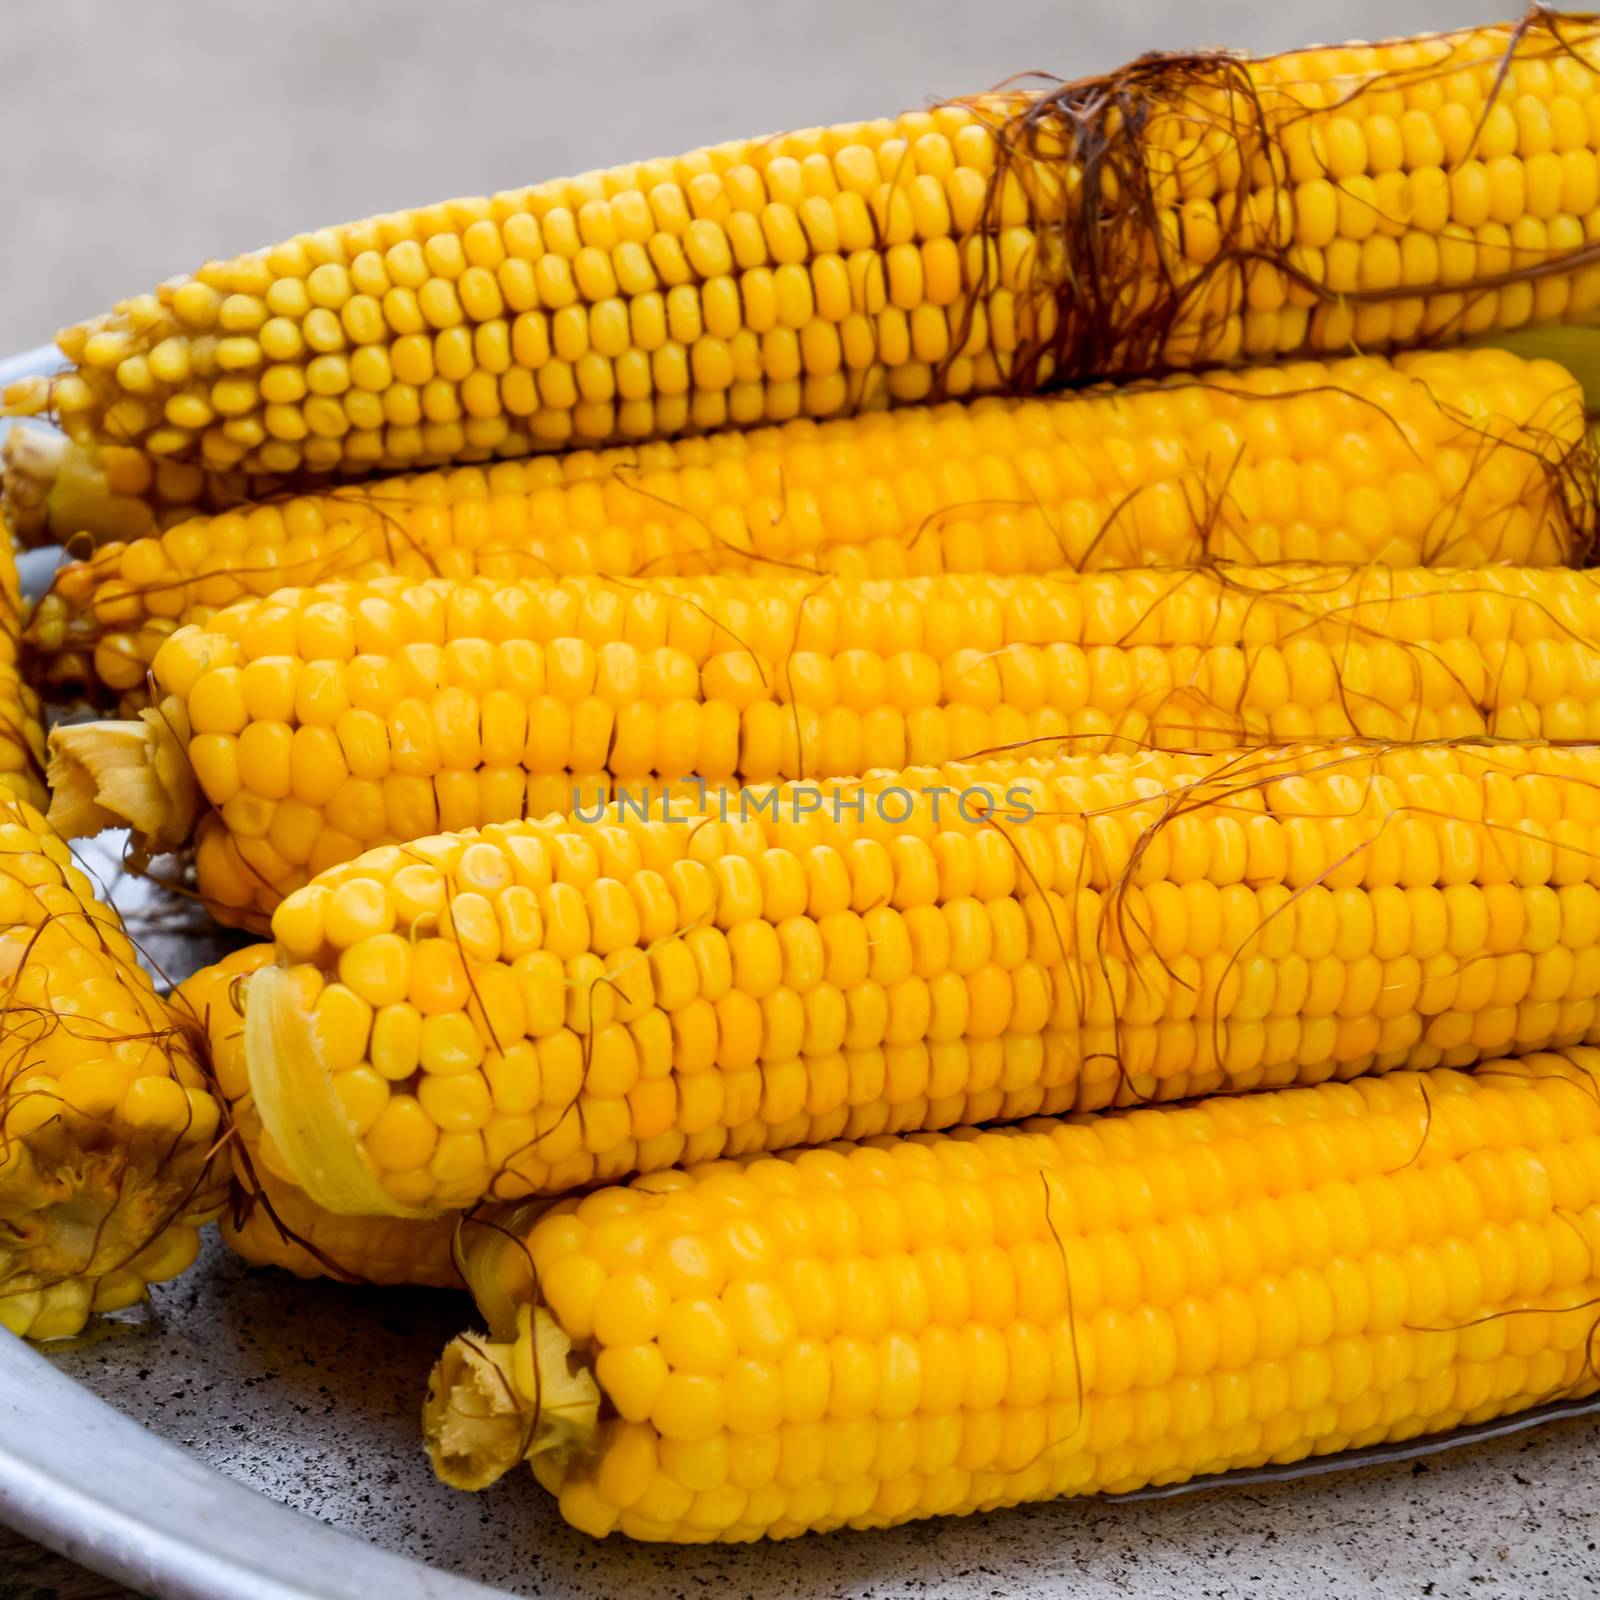 Boiled corn on an aluminum tray. Yellow boiled young corn, useful and tasty food by eleonimages